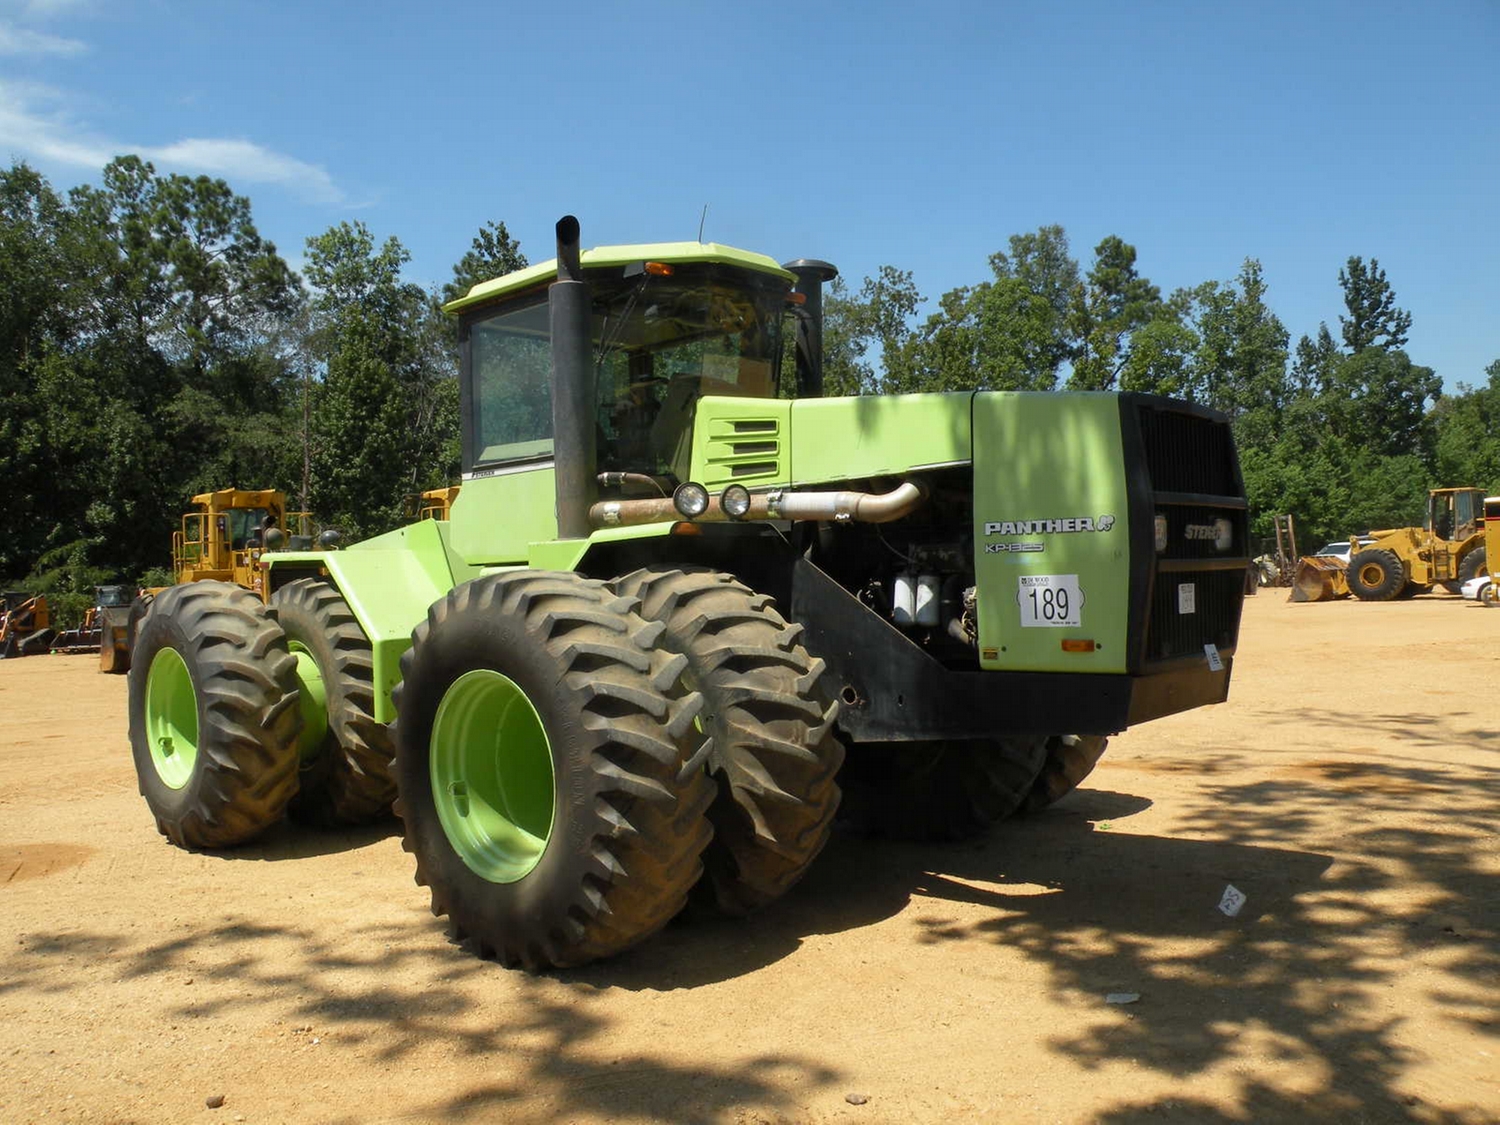 STEIGER PANTHER KP-1325 AG TRACTOR - J.M. Wood Auction Company, Inc.